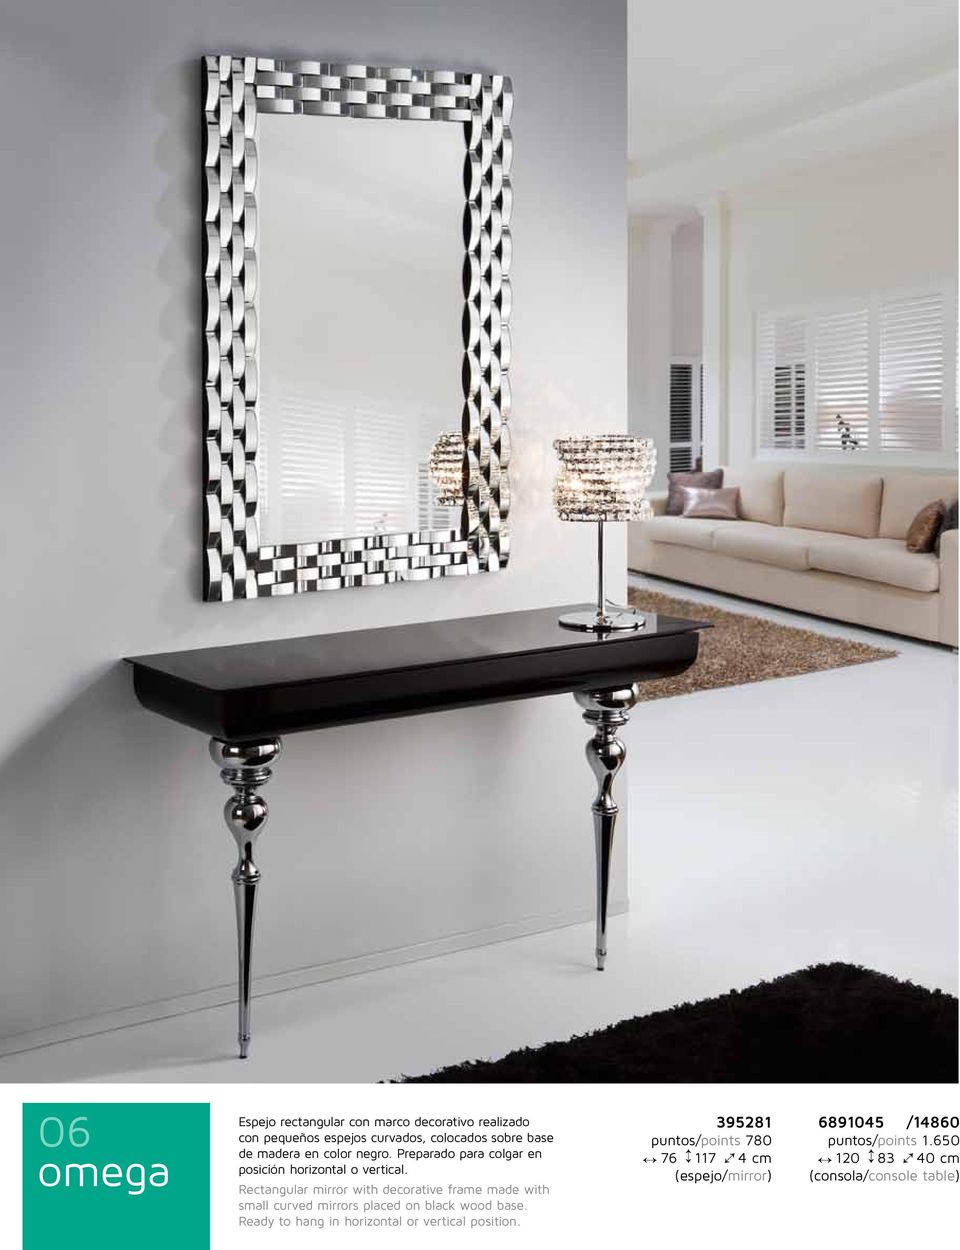 Rectangular mirror with decorative frame made with small curved mirrors placed on black wood base.